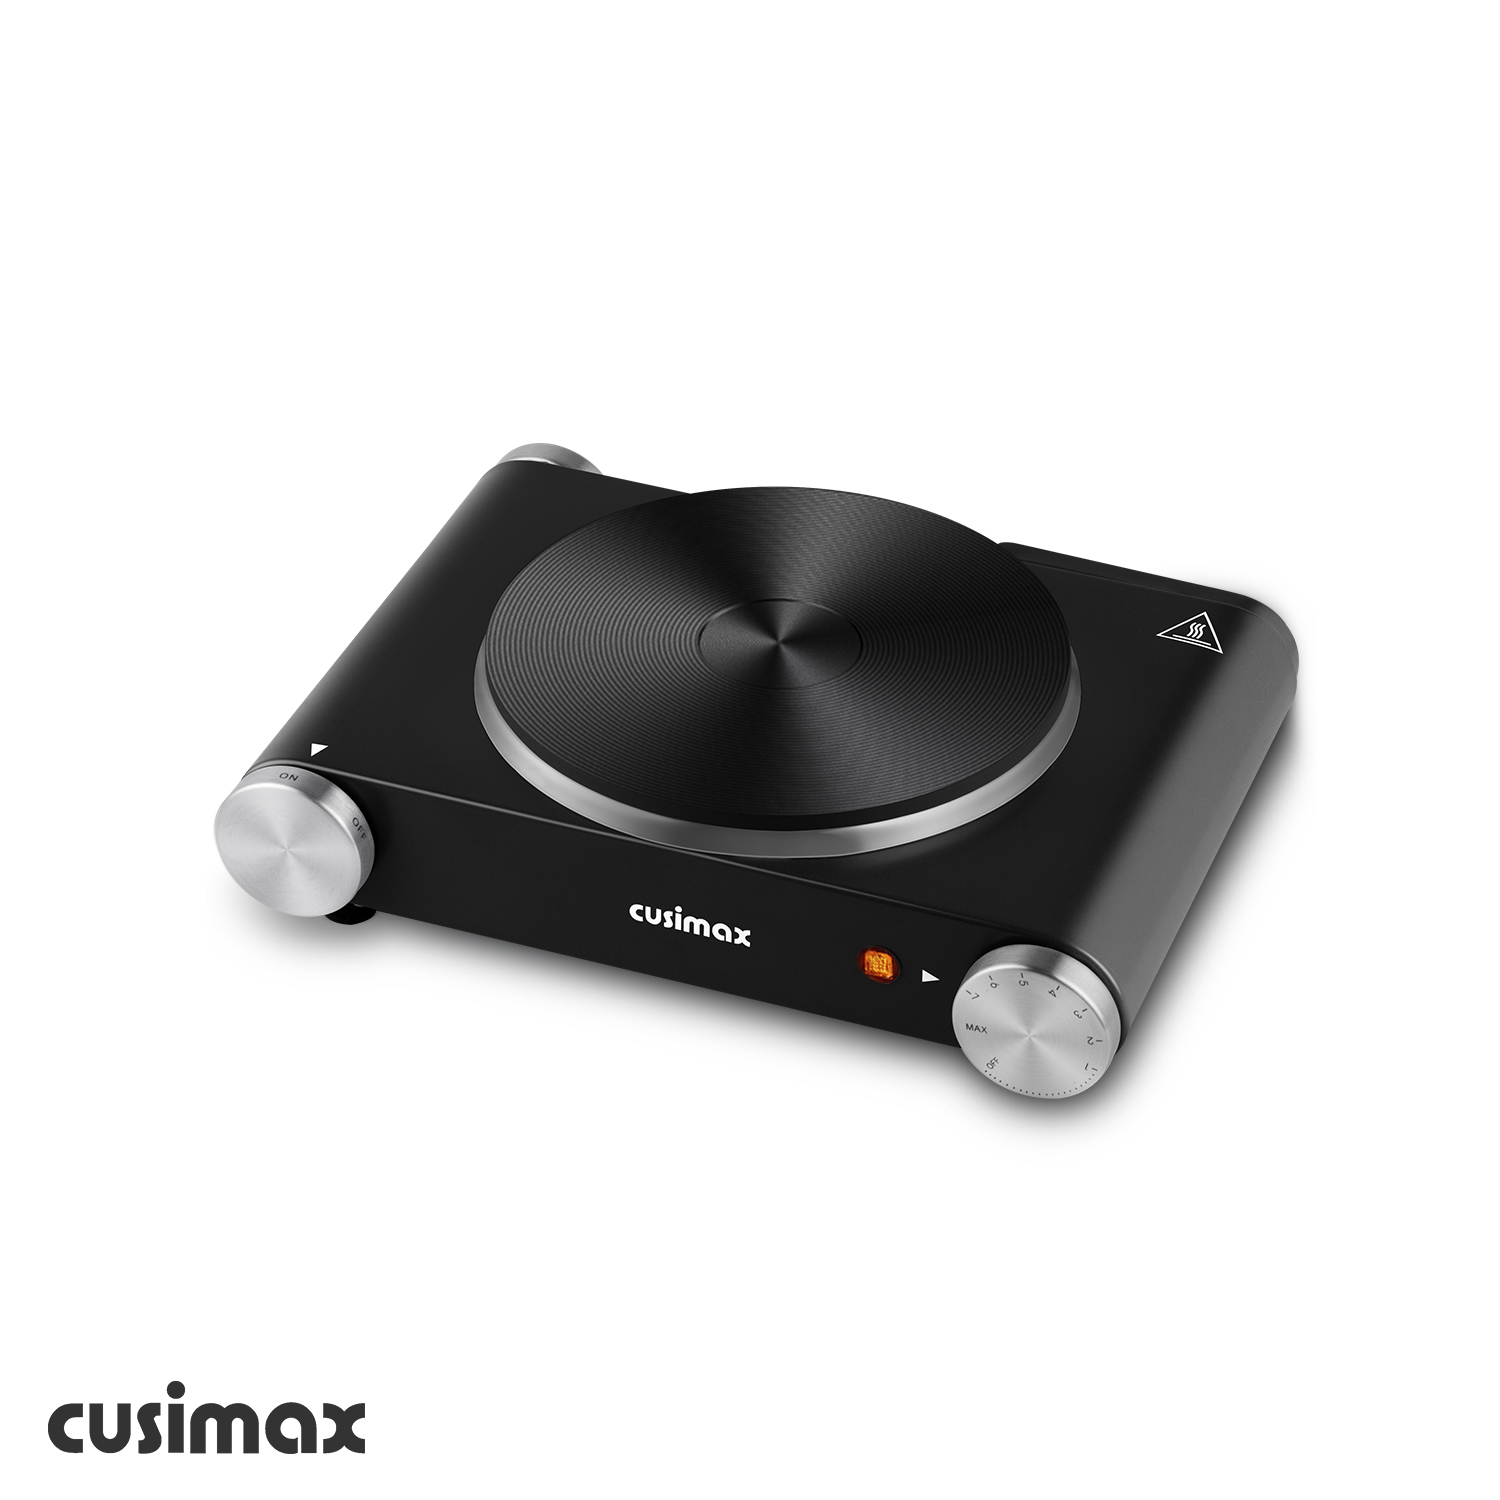 https://www.momjunction.com/wp-content/uploads/product-images/cusimax-hot-plate-portable-electric-stove-countertop-single-burner_afl1519.jpg